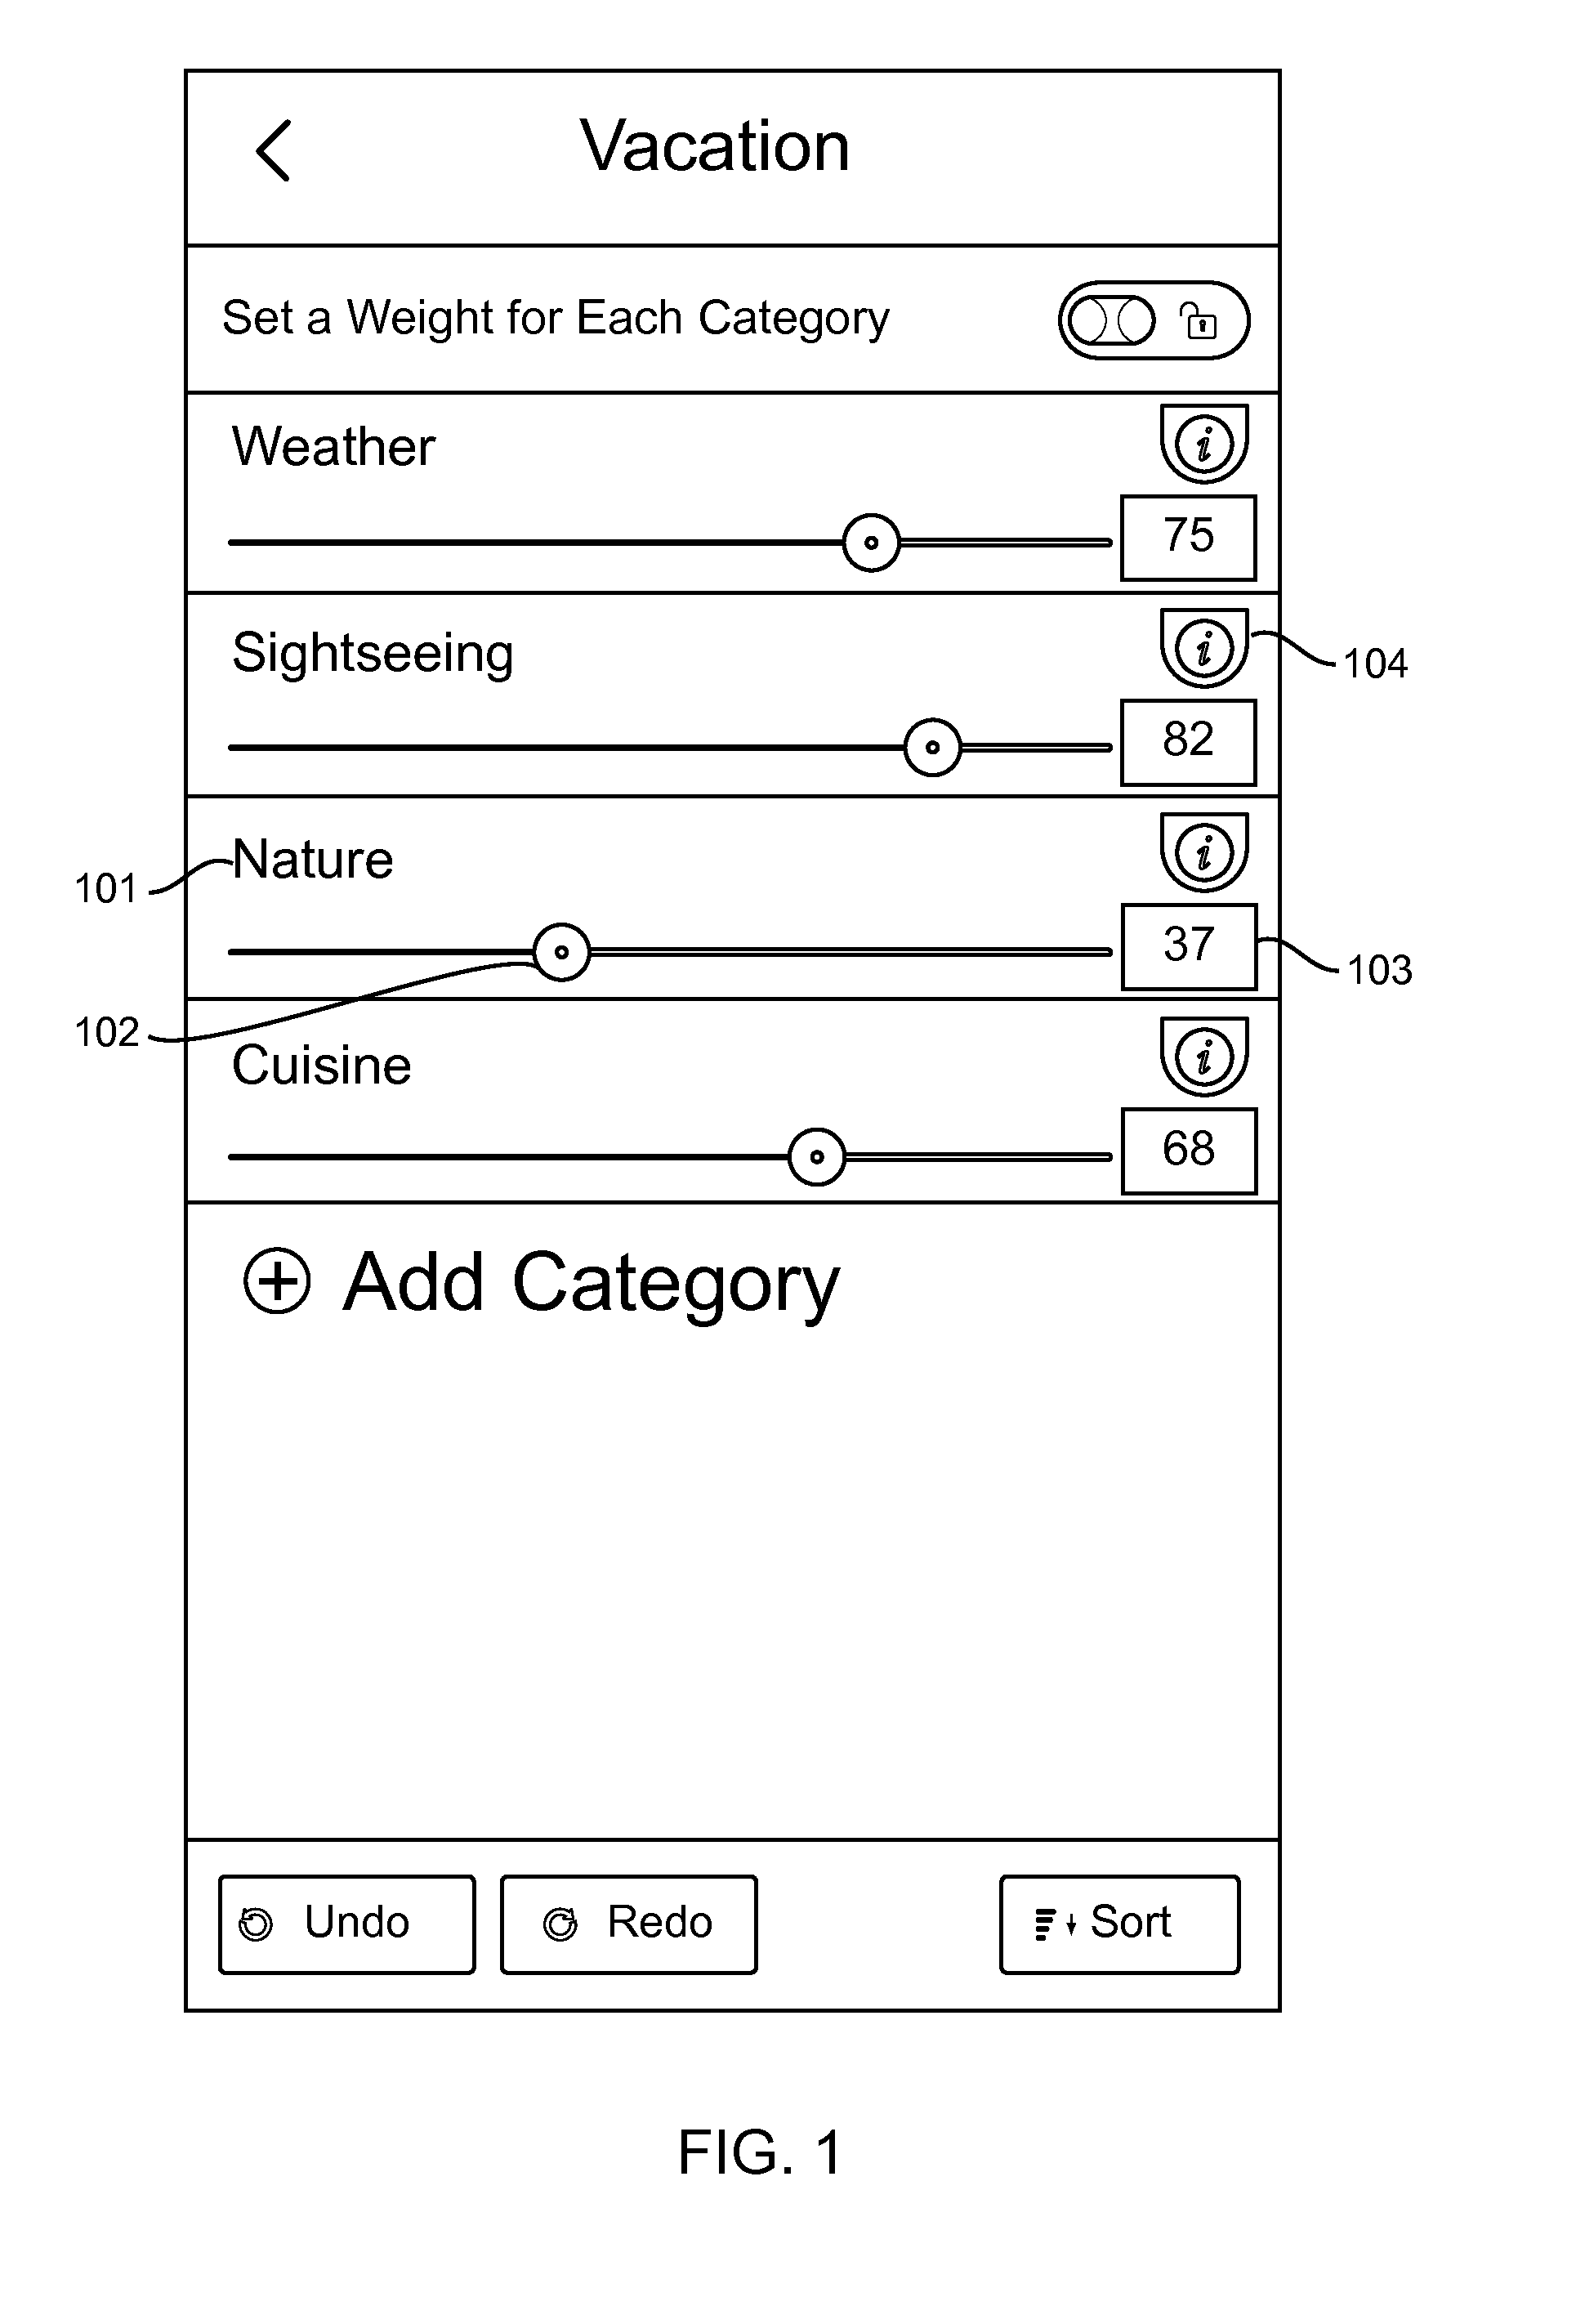 Software Interface and Method for Ranking or Rating Items